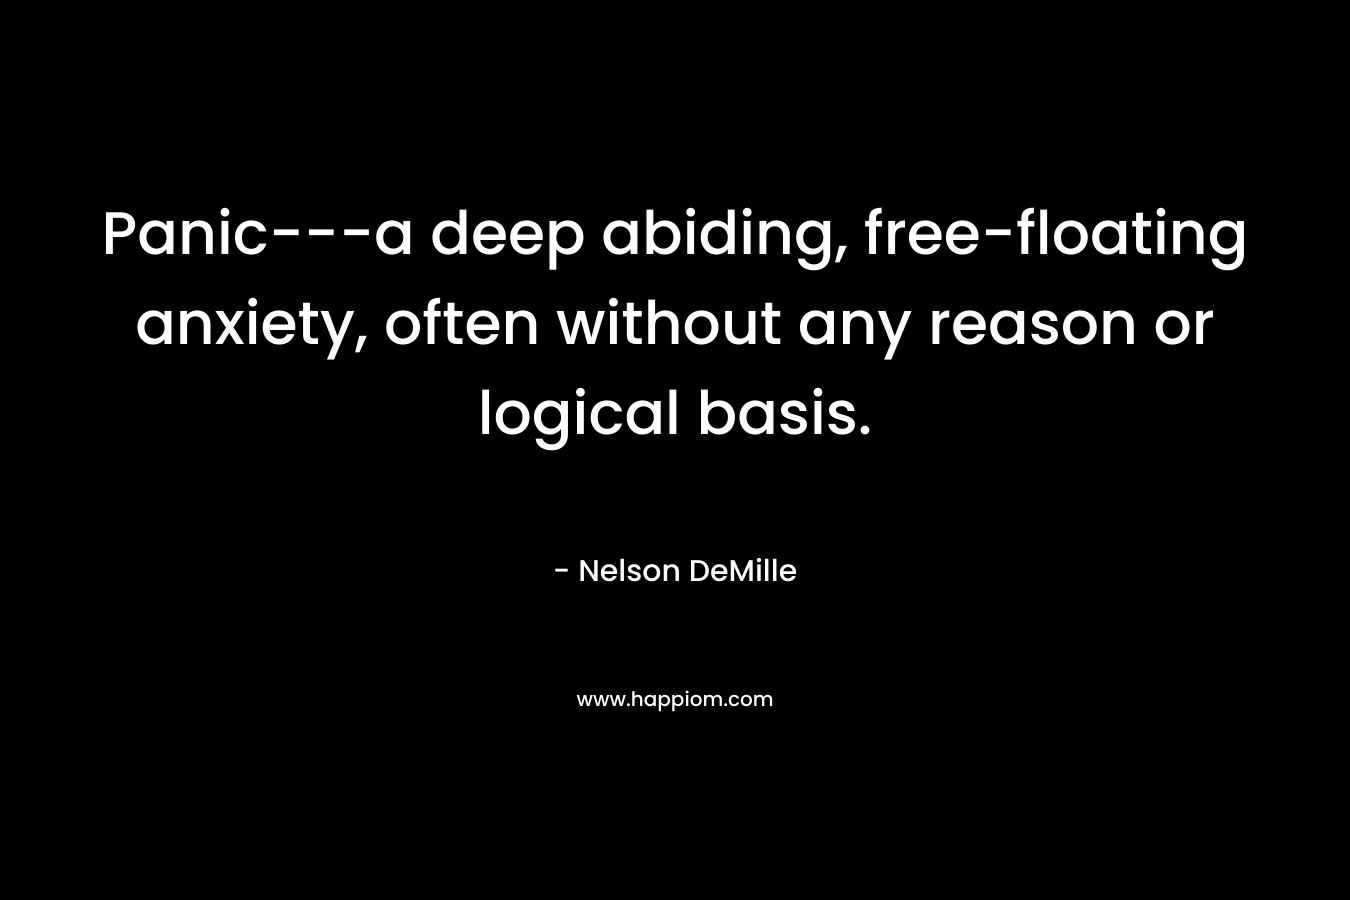 Panic—a deep abiding, free-floating anxiety, often without any reason or logical basis. – Nelson DeMille